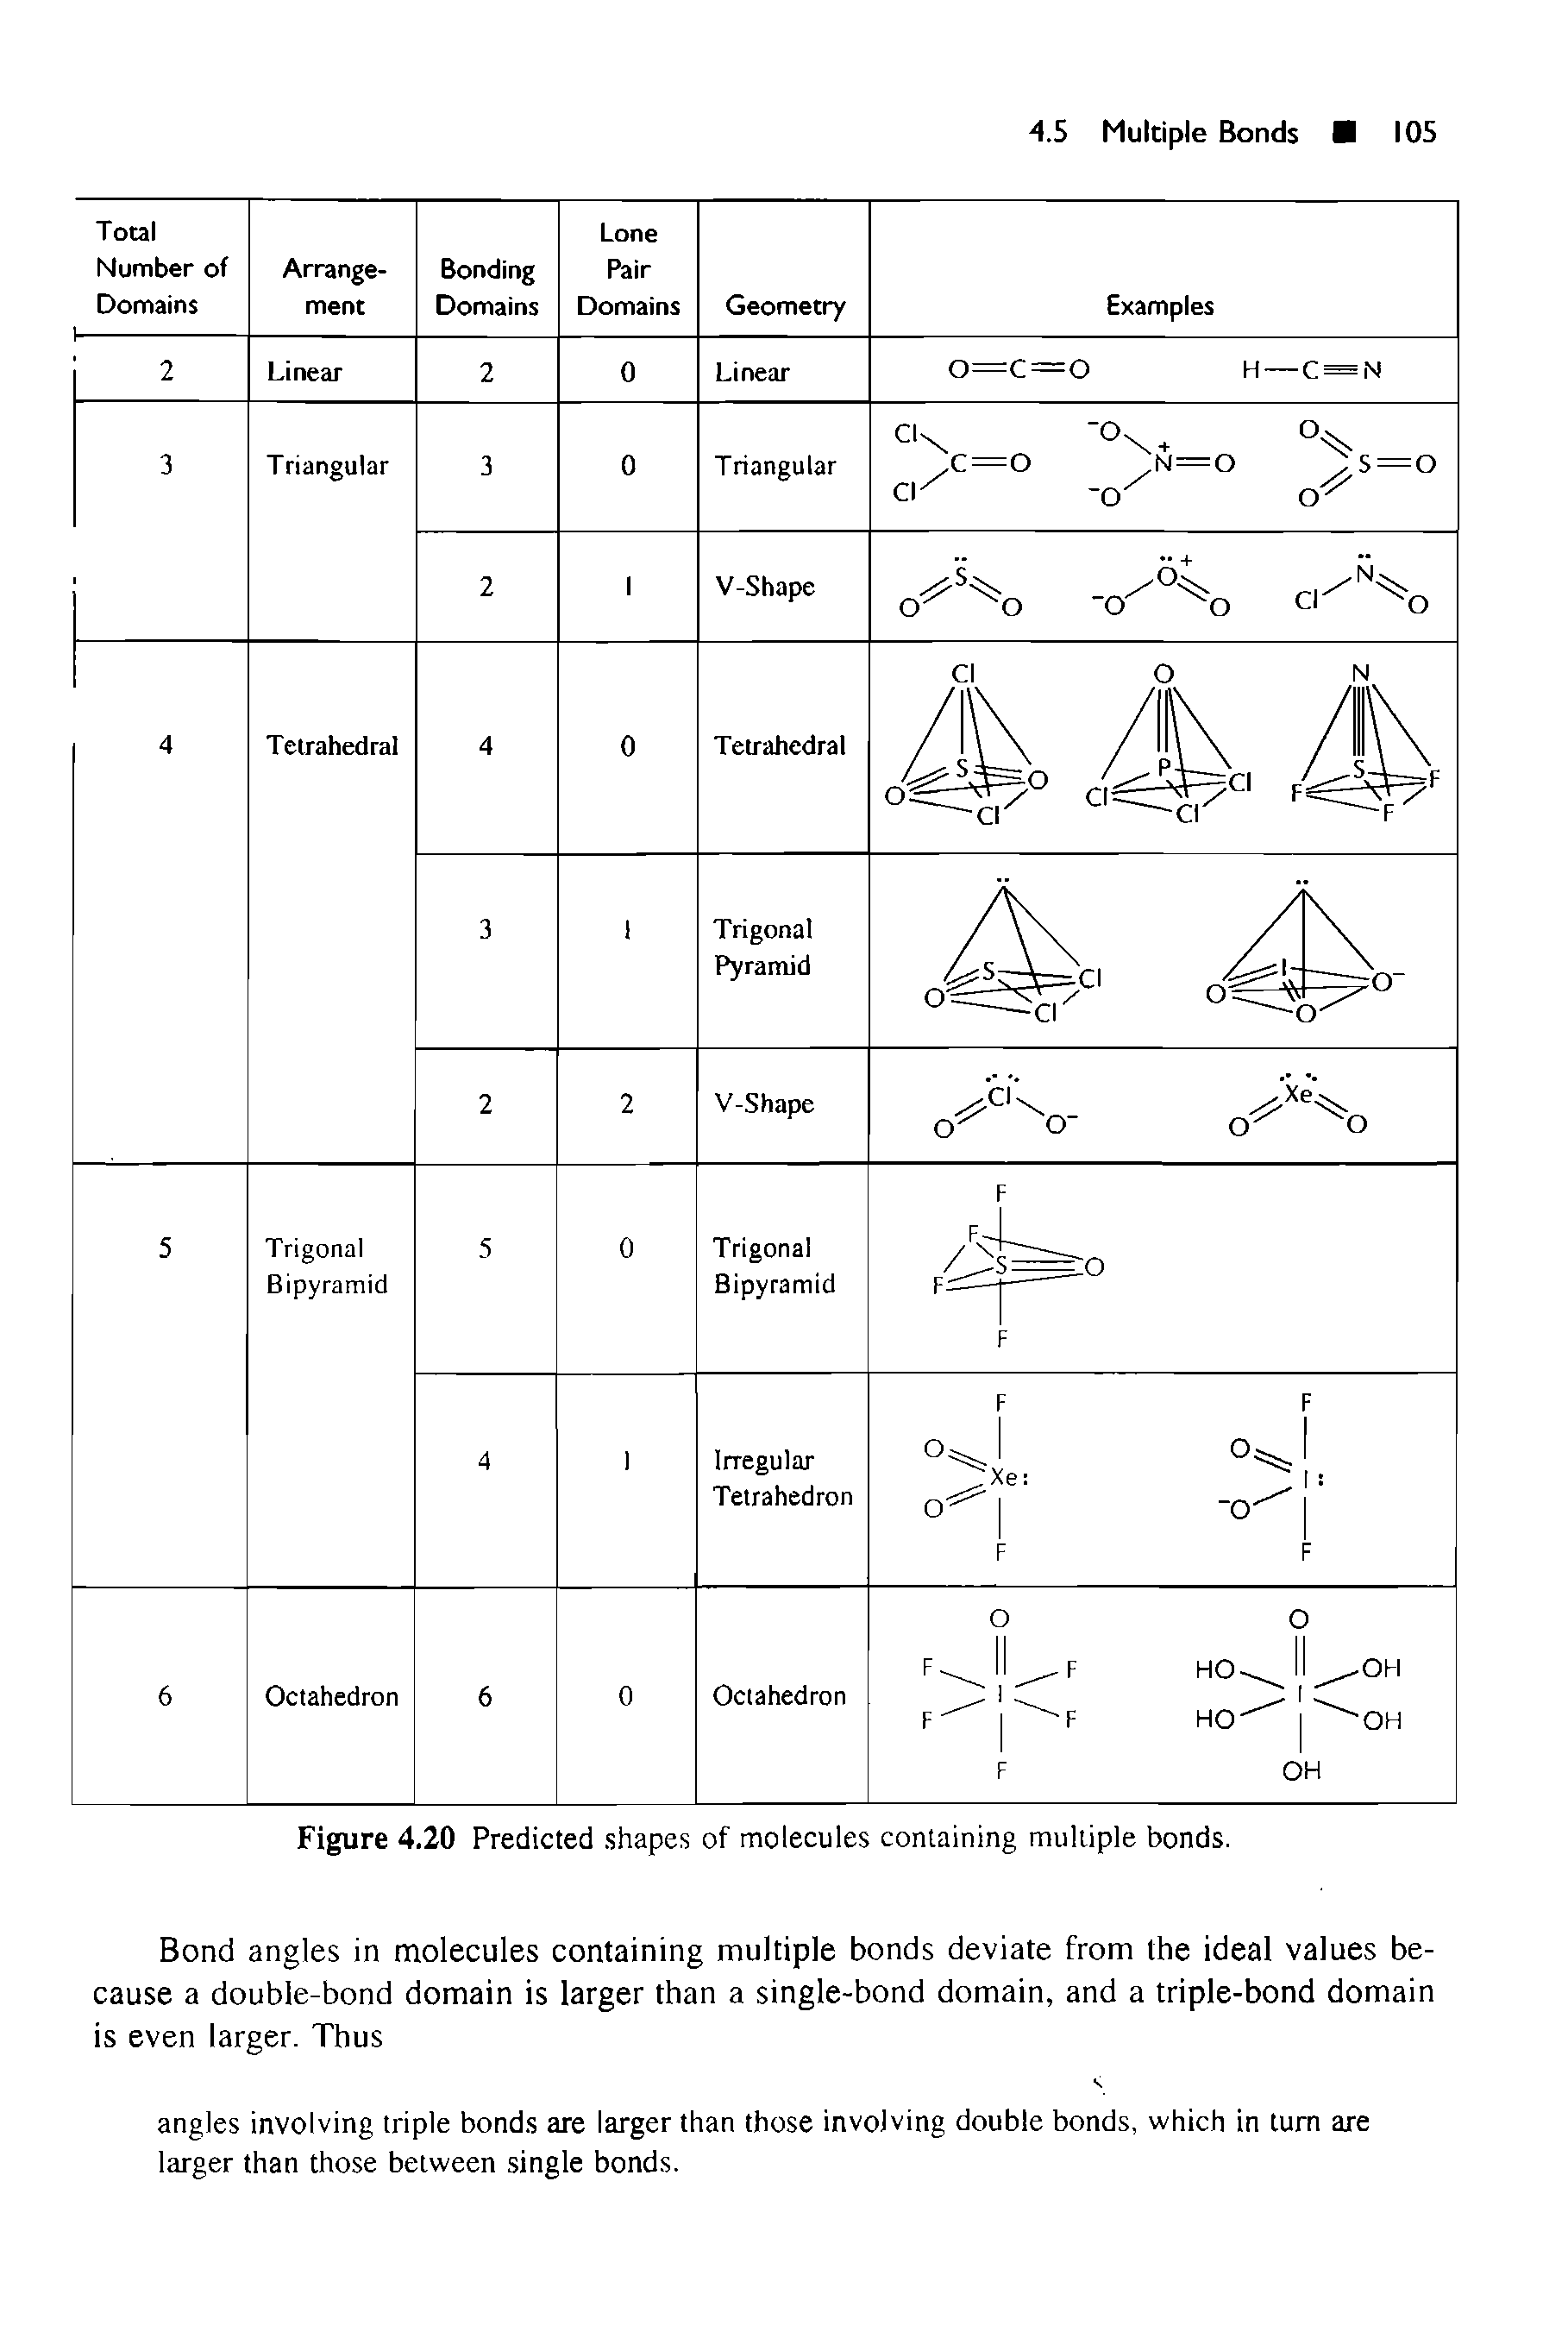 Figure 4.20 Predicted shapes of molecules containing multiple bonds.